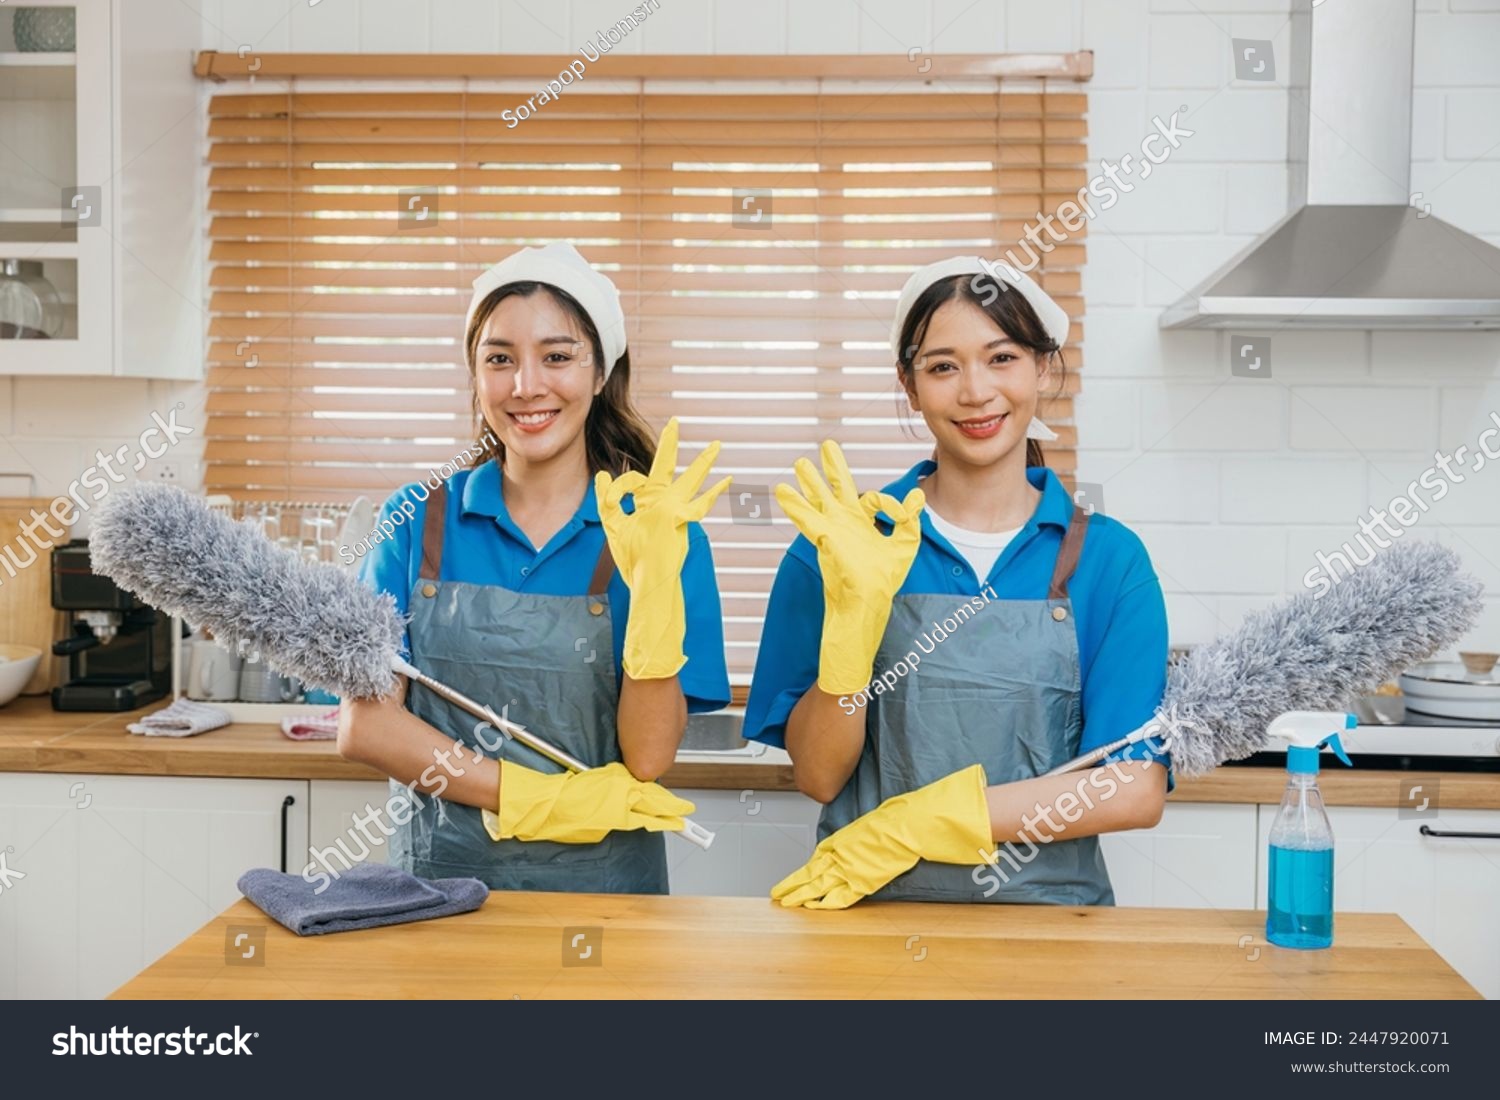 Two Asian young cleaning service women on kitchen counter with duster foggy spray and rag showcase efficient housework teamwork. Clean portrait two uniform maid working smiling employee. #2447920071